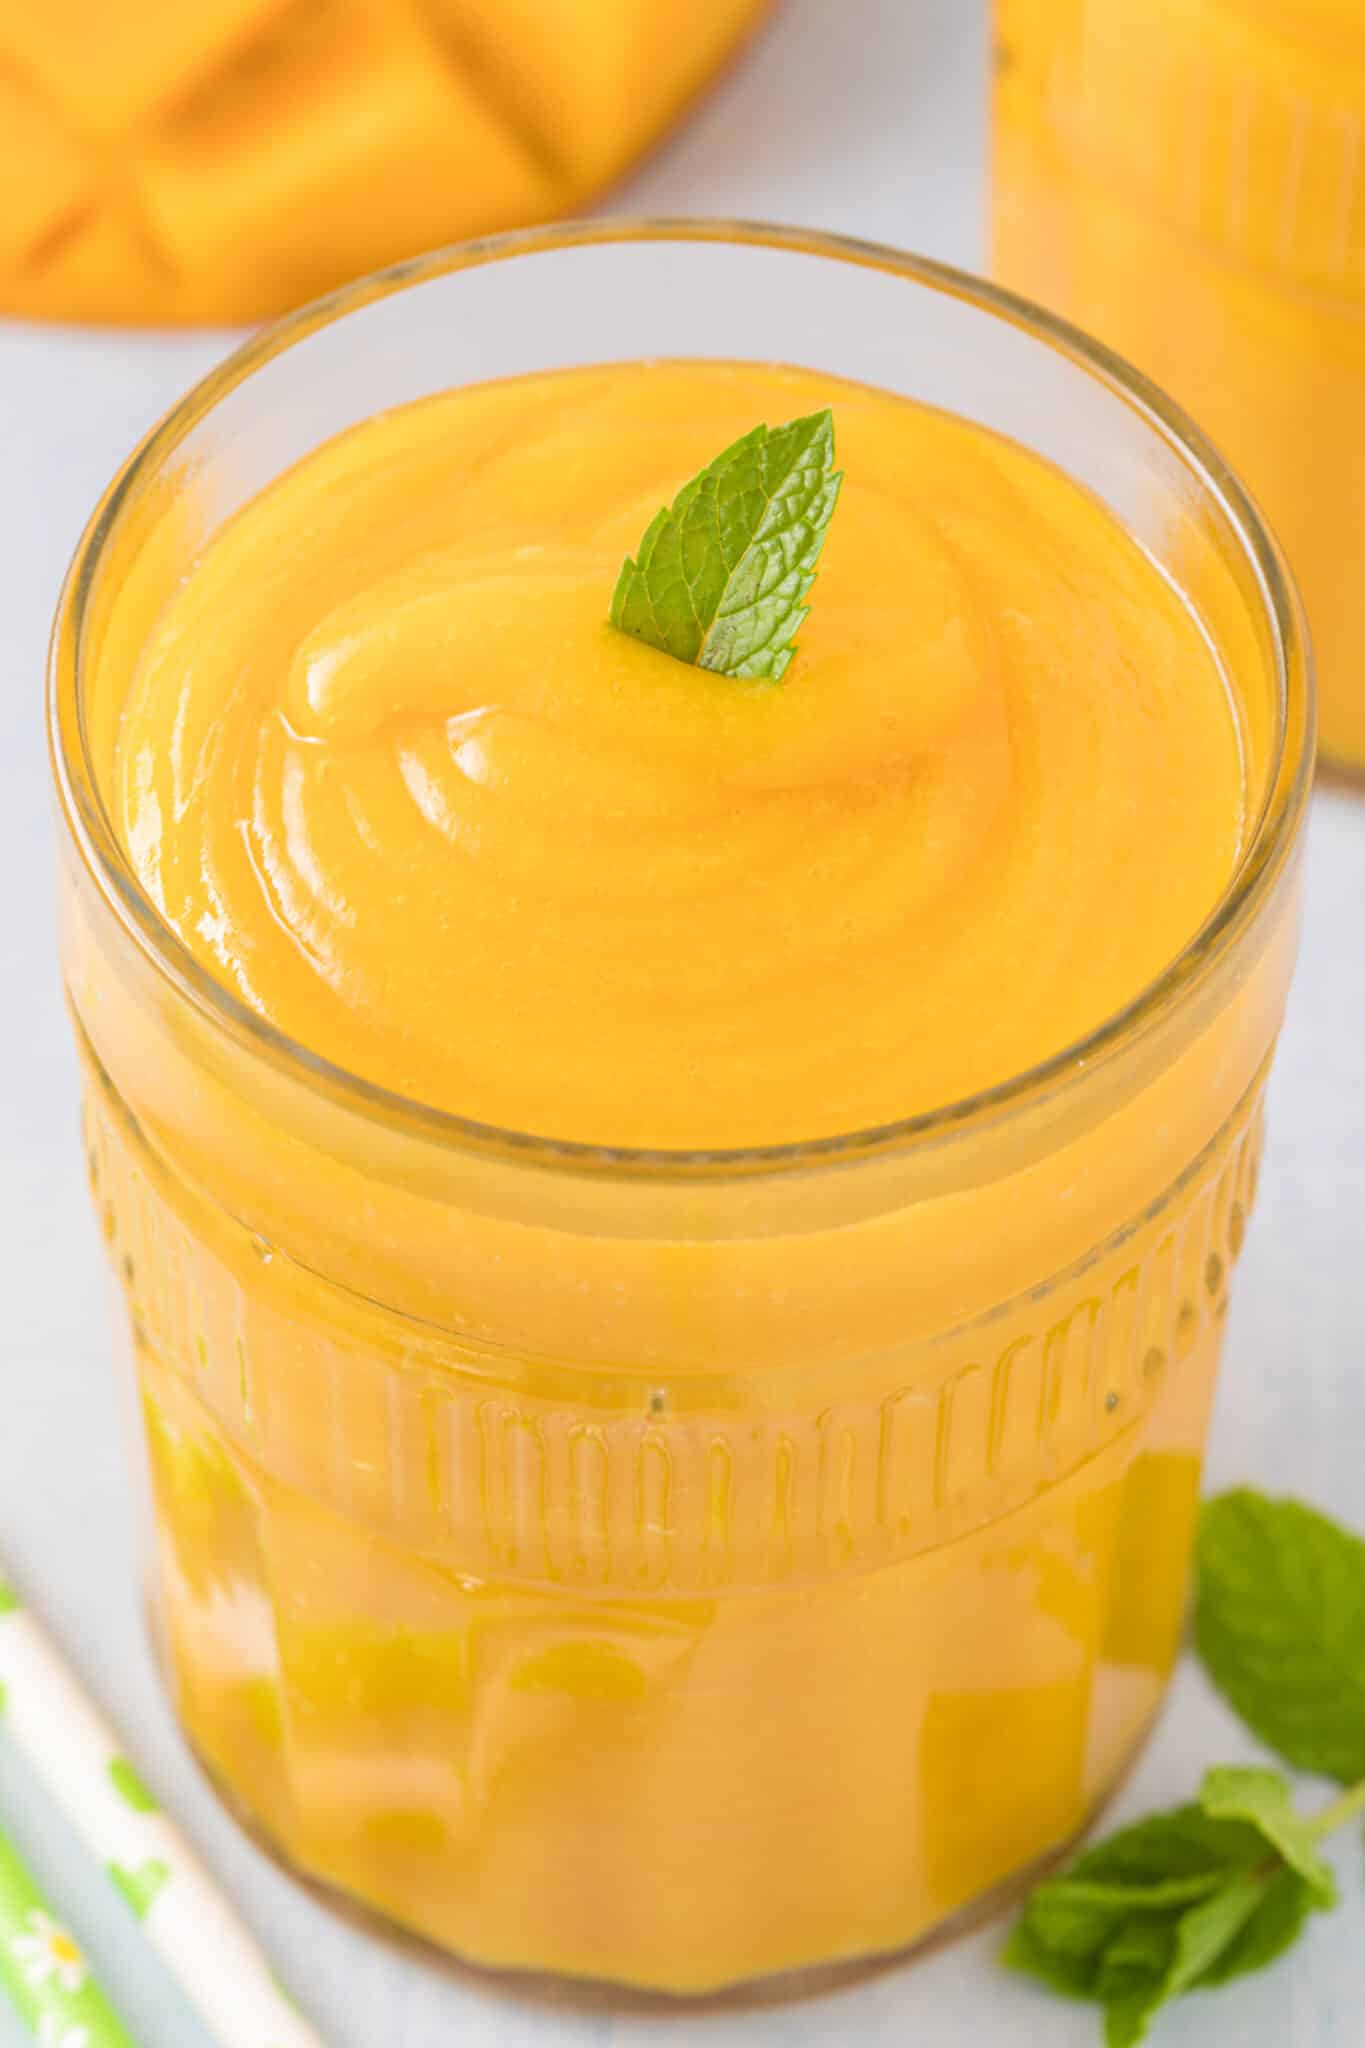 mango juice served in a glass with a fresh mint leaf.